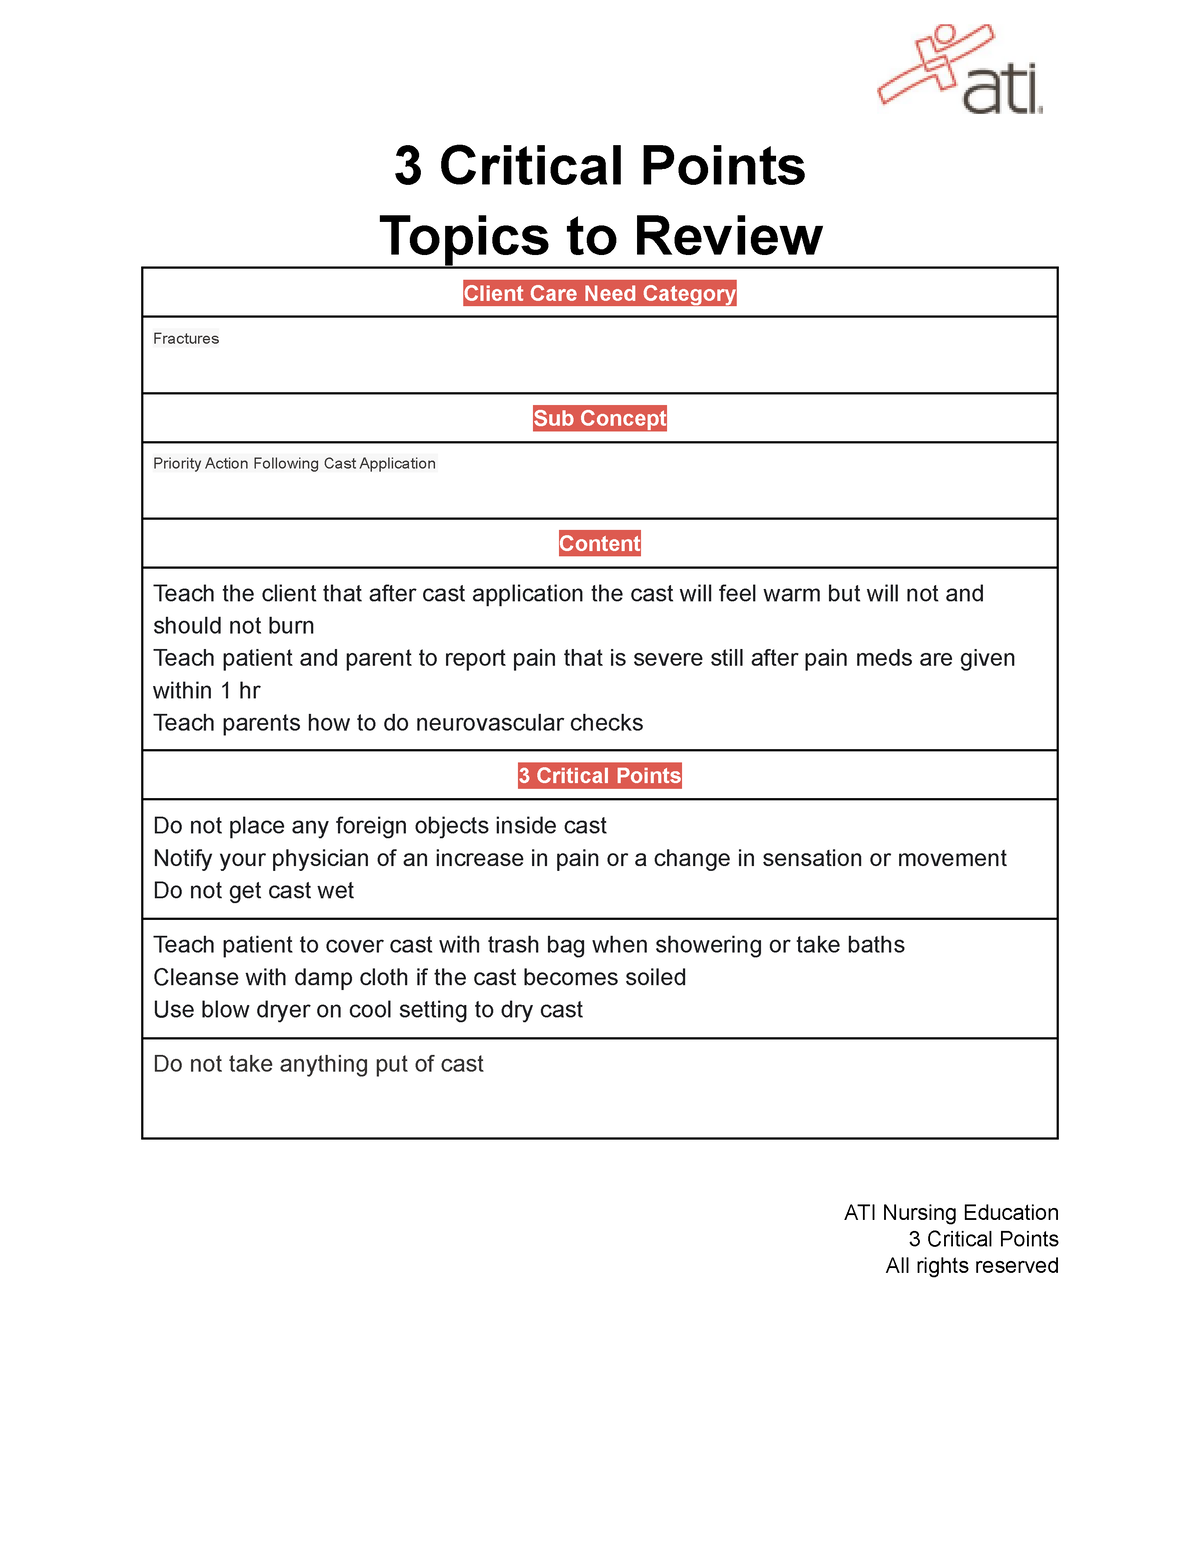 9-work-3-critical-points-topics-to-review-client-care-need-category